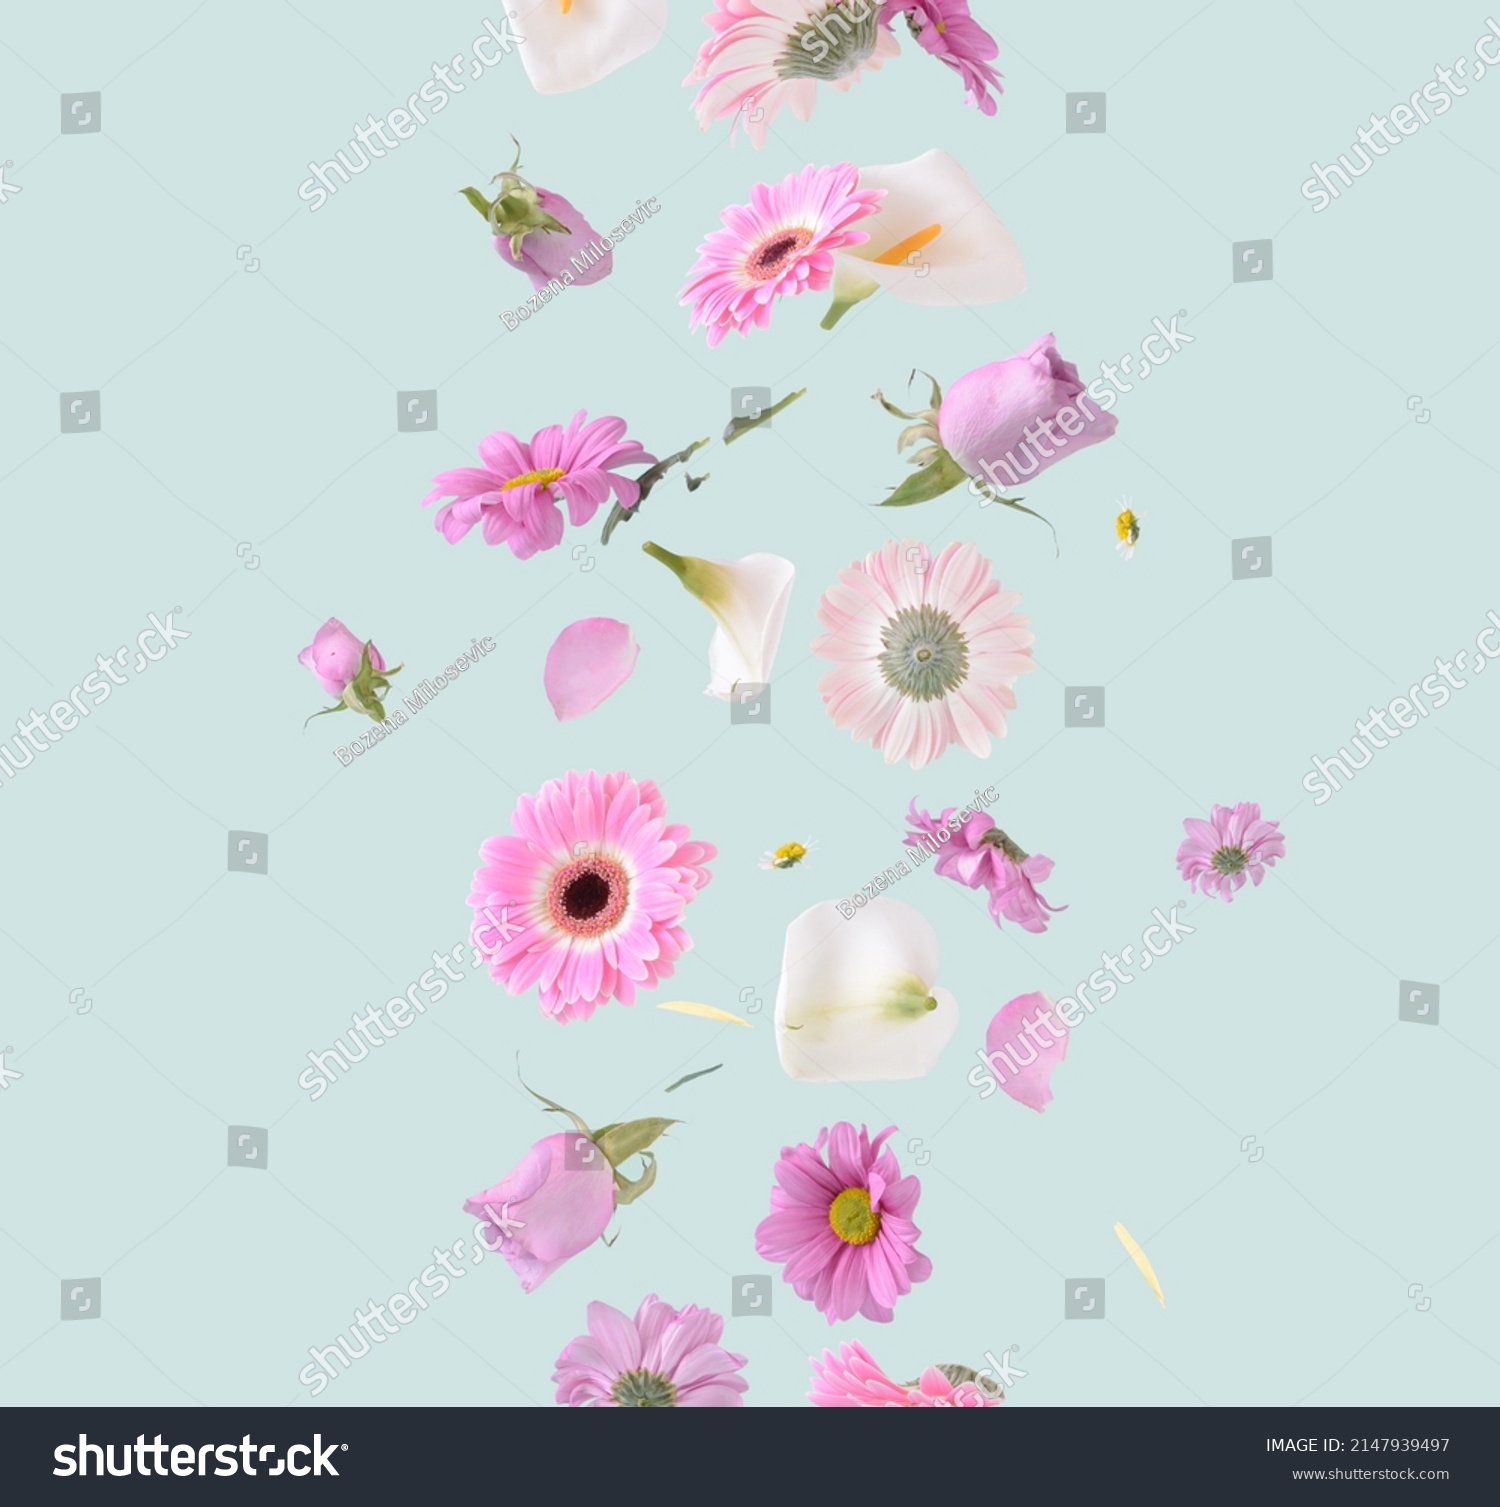 Flowers levitating on a pastel green background. Colorful pink, white and purple trendy summer flowers flying. Surreal aesthetic nature concept. #2147939497